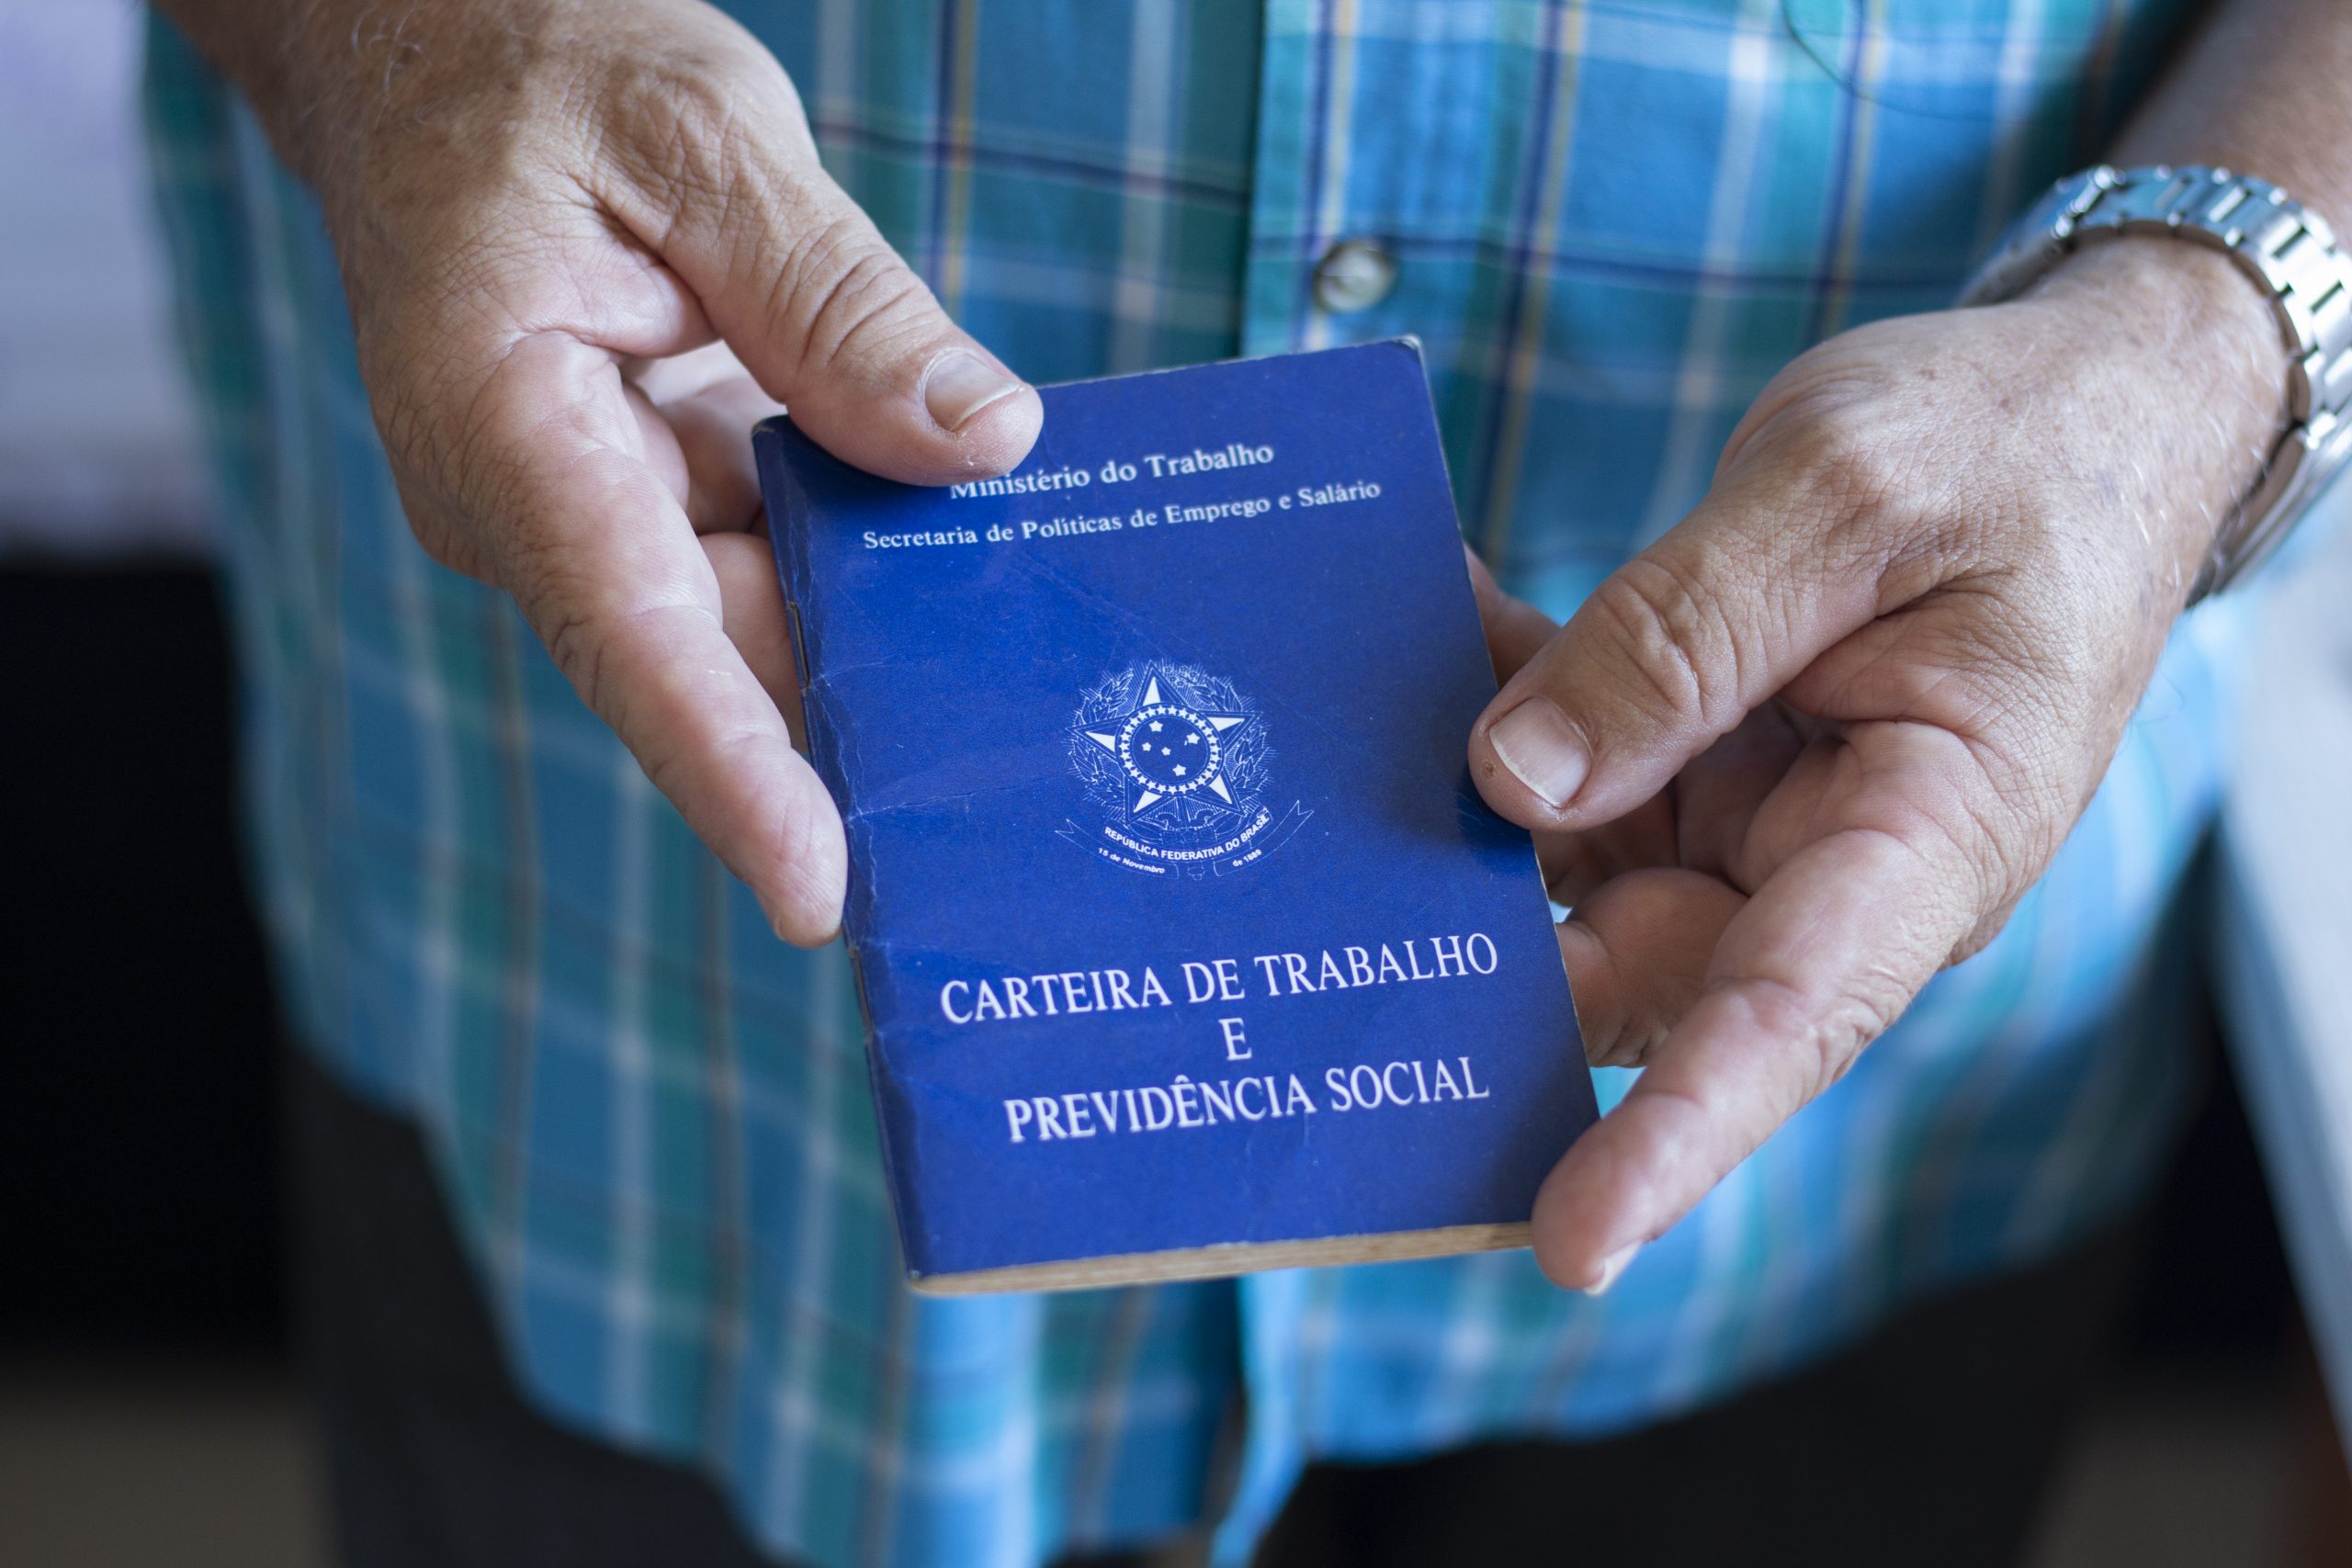 a person holding a blue book